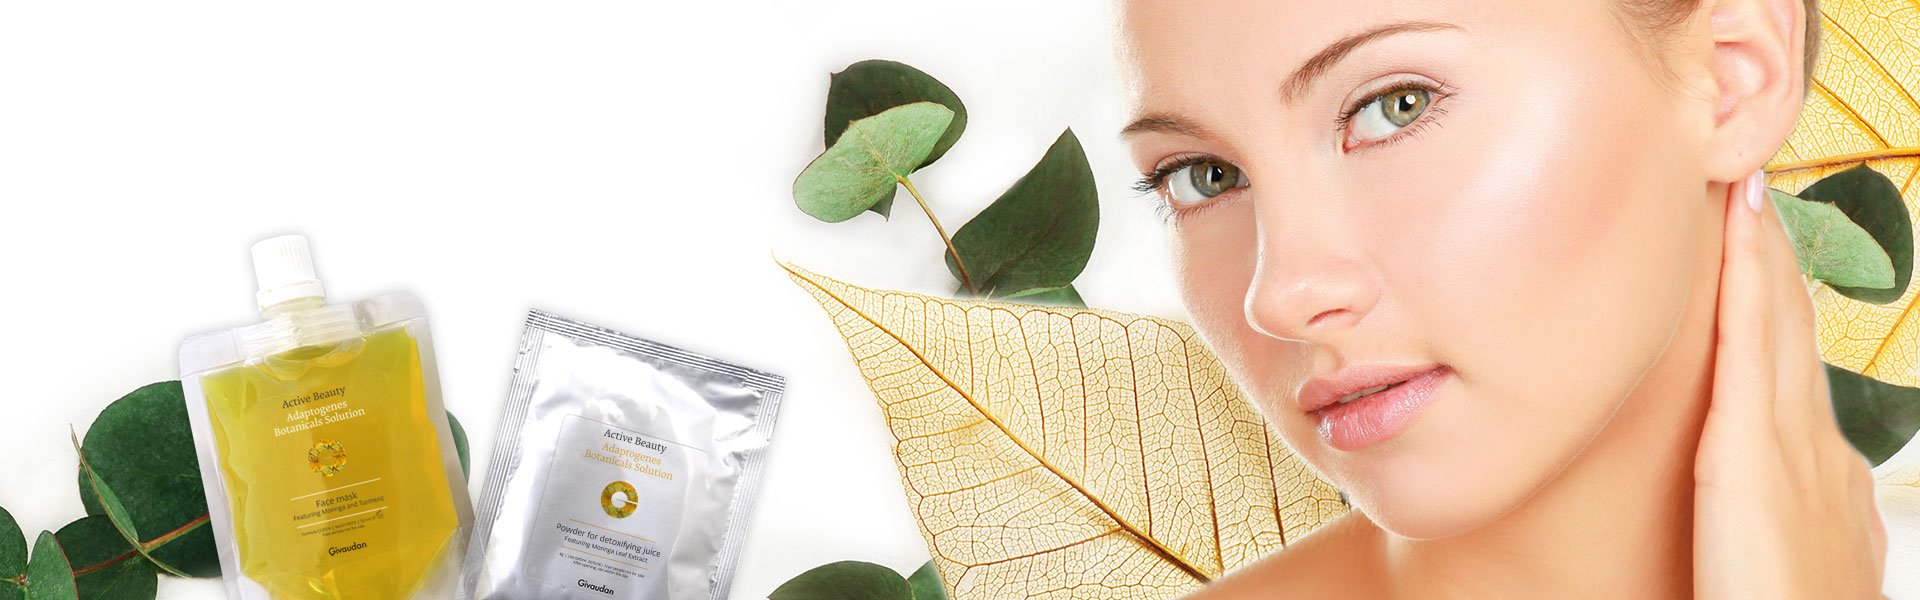 Adaptogenes Botanicals Solution: The herbarium for well-balanced beauty 